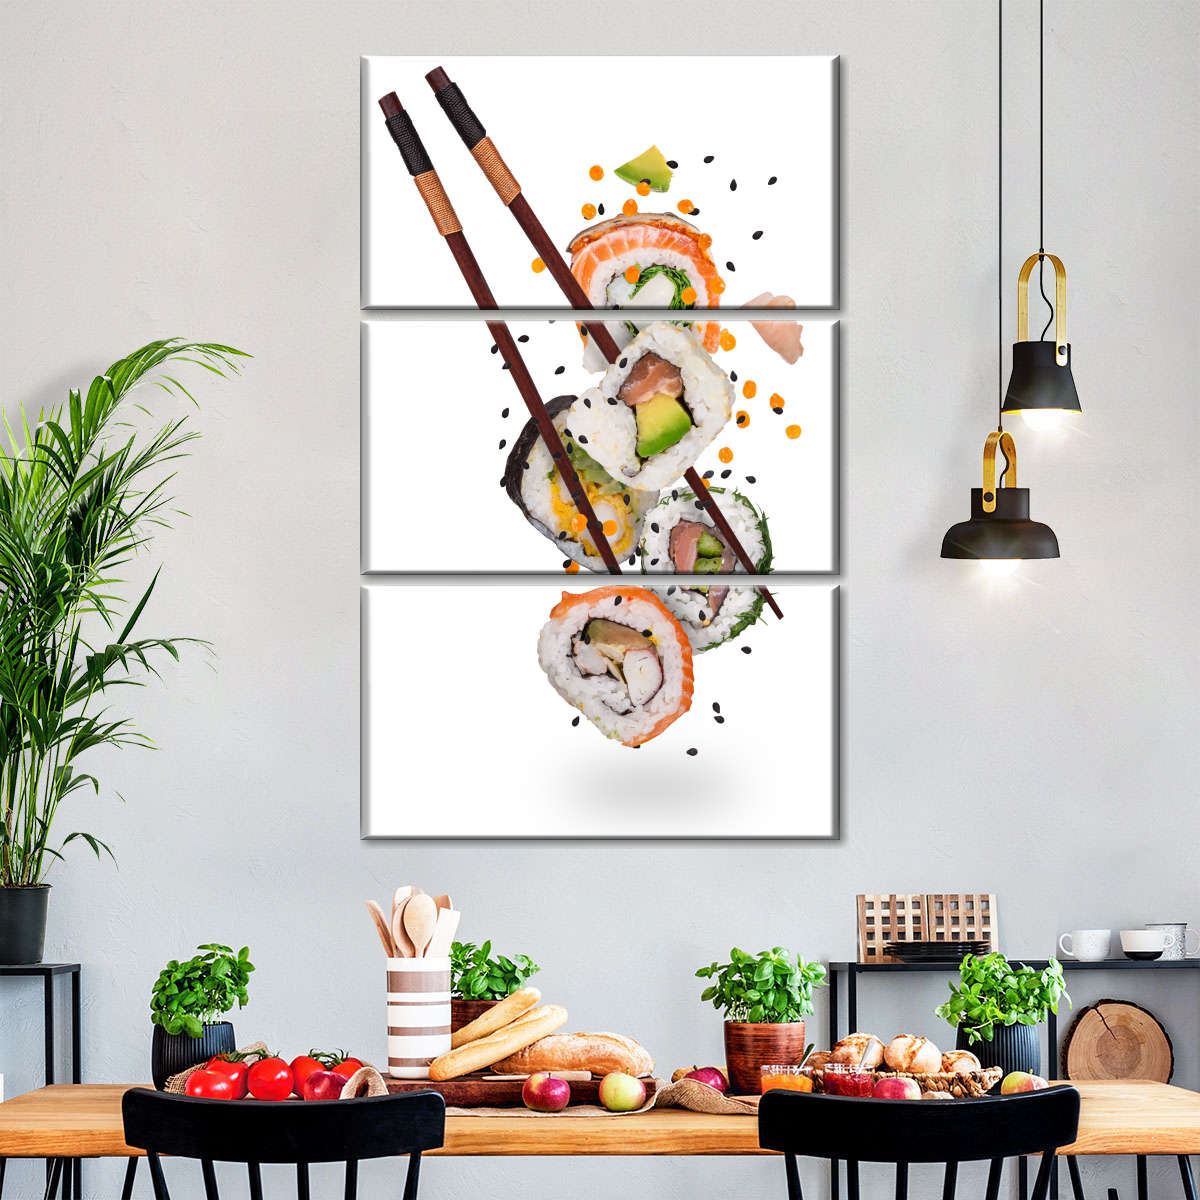 Japanese Sushi Art: Canvas Prints, Frames  Posters